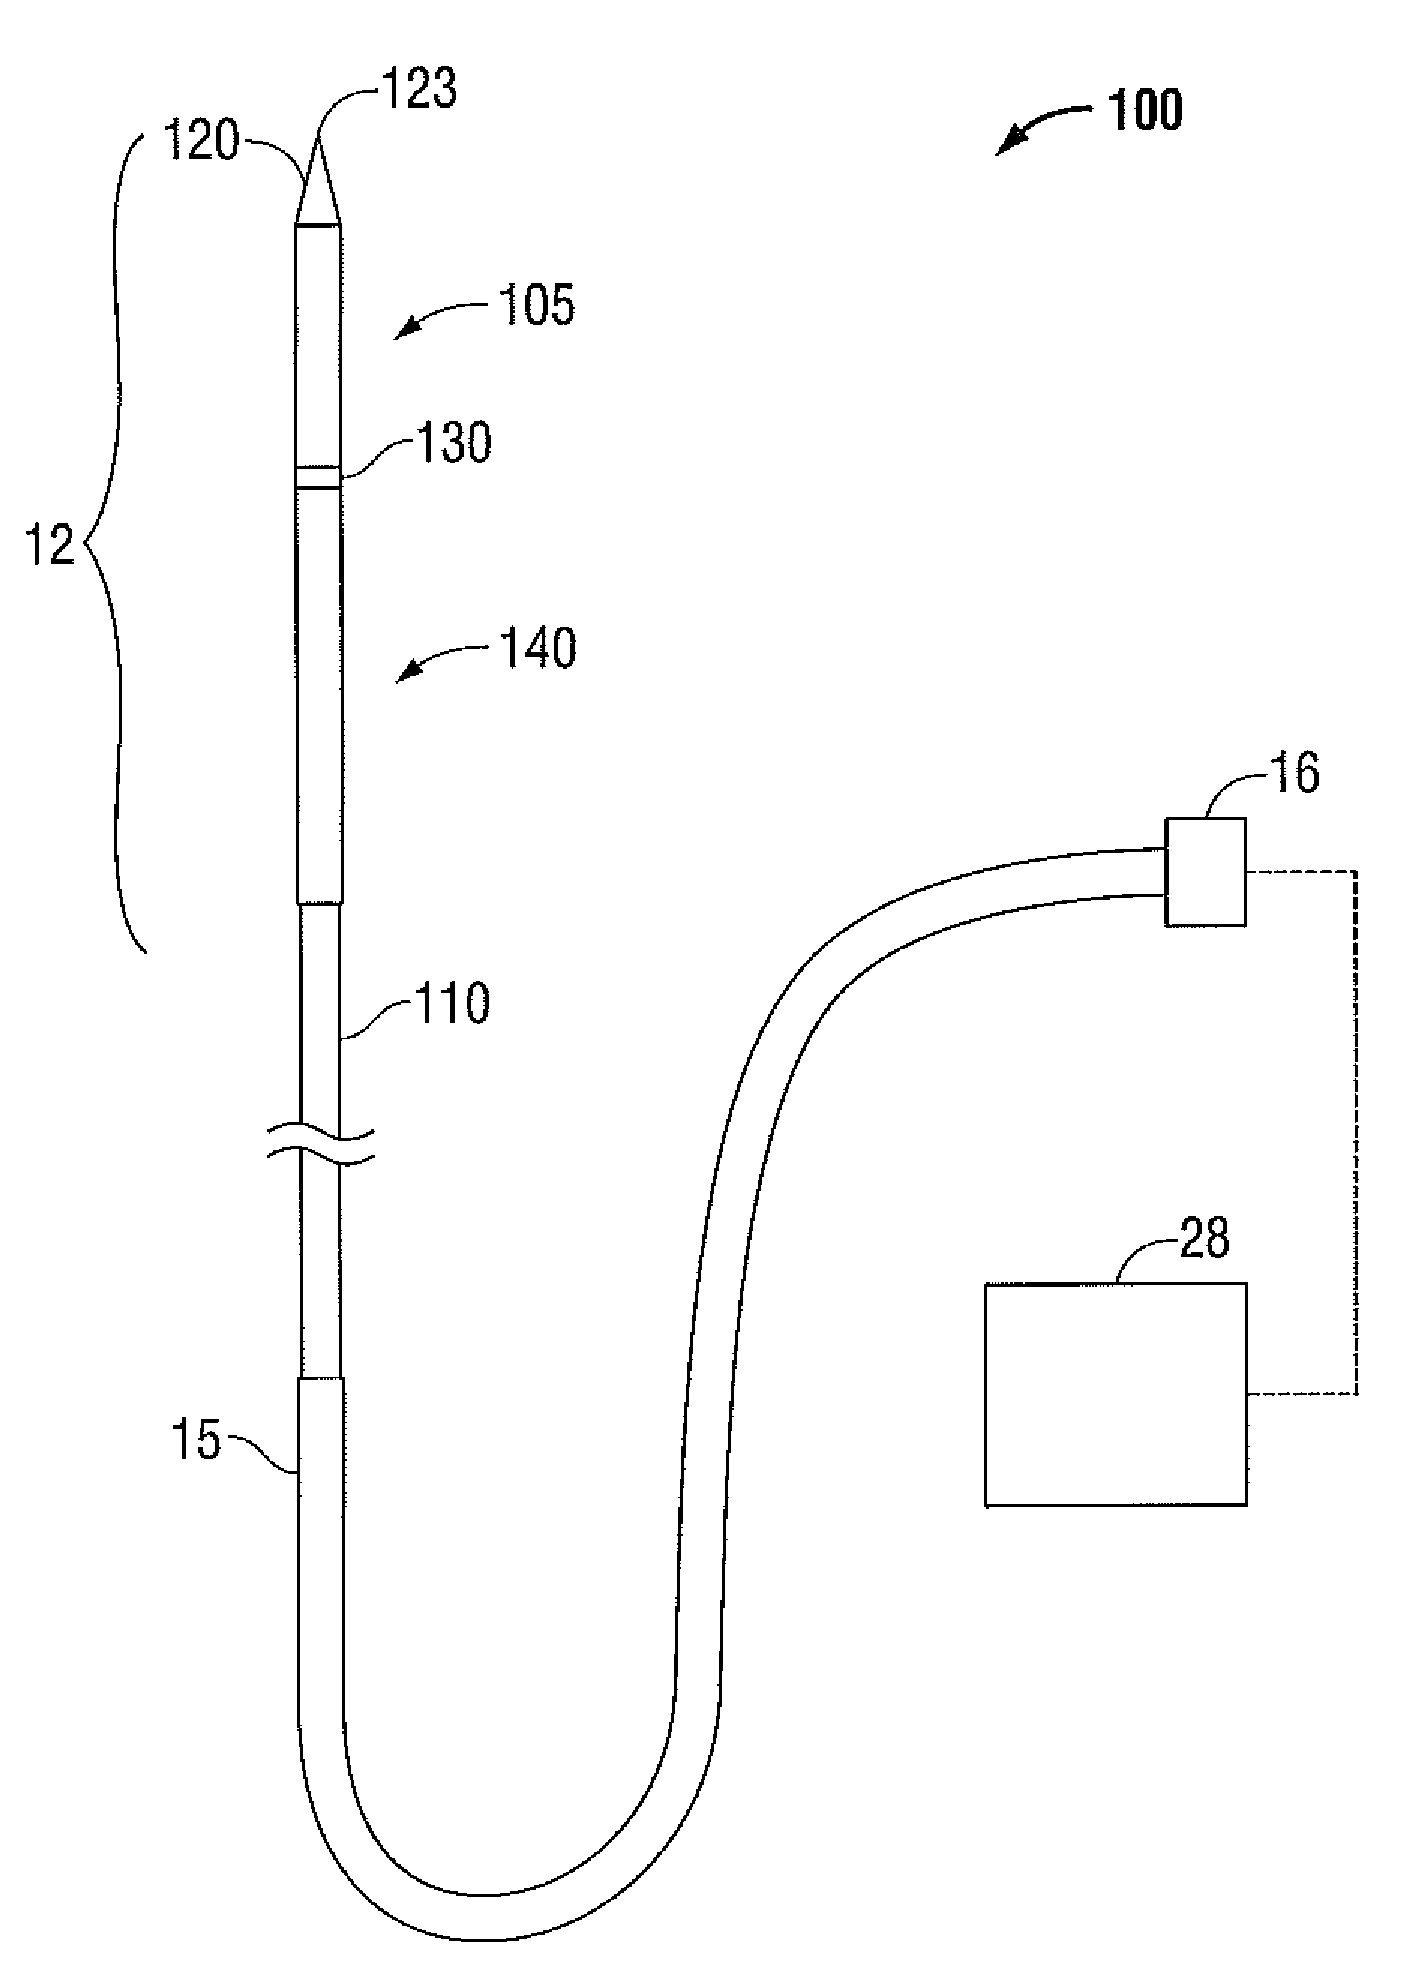 Cooled Dielectrically Buffered Microwave Dipole Antenna